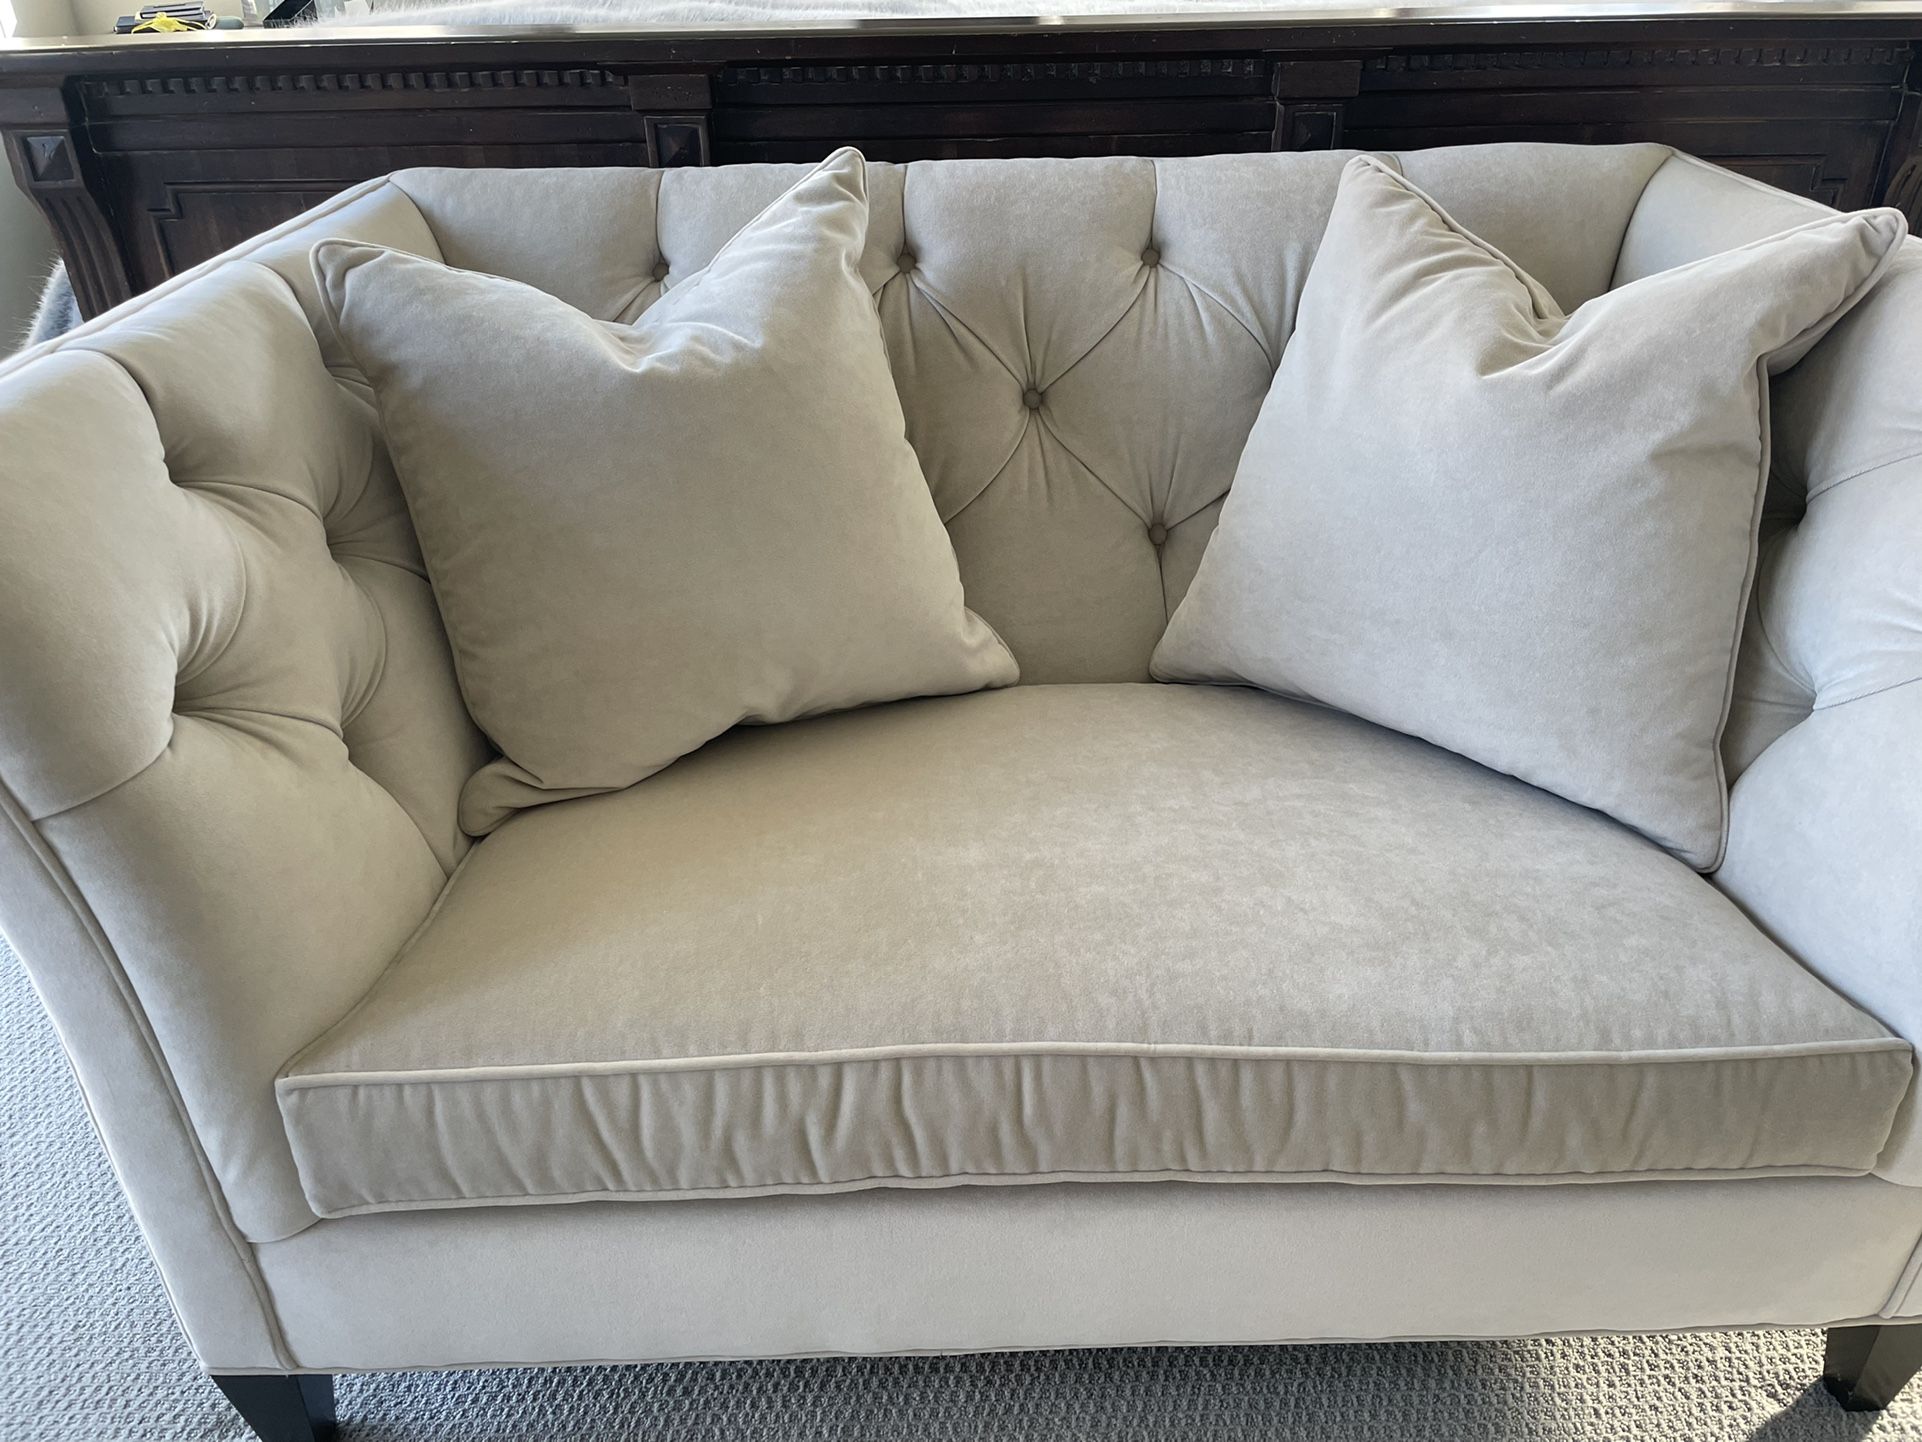 Ethan Allen Cream Colored Loveseat Couch